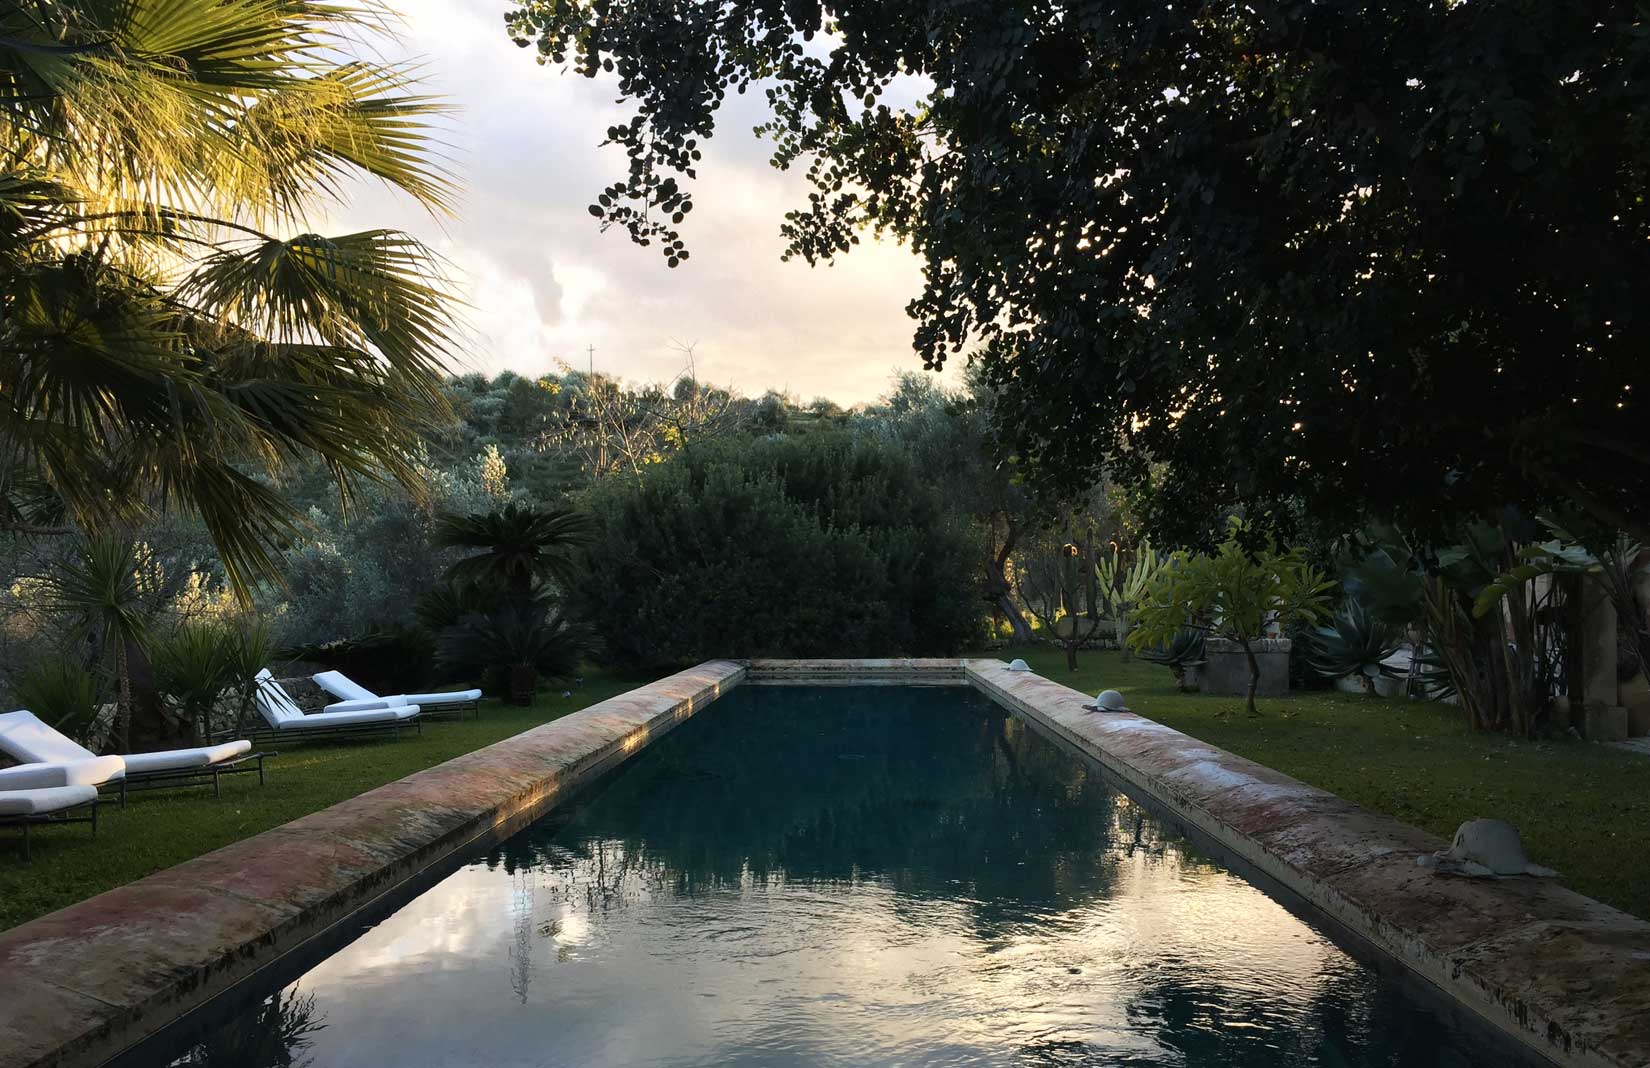 This sun-baked retreat by Jacques Garcia is surrounded by ancient olive groves